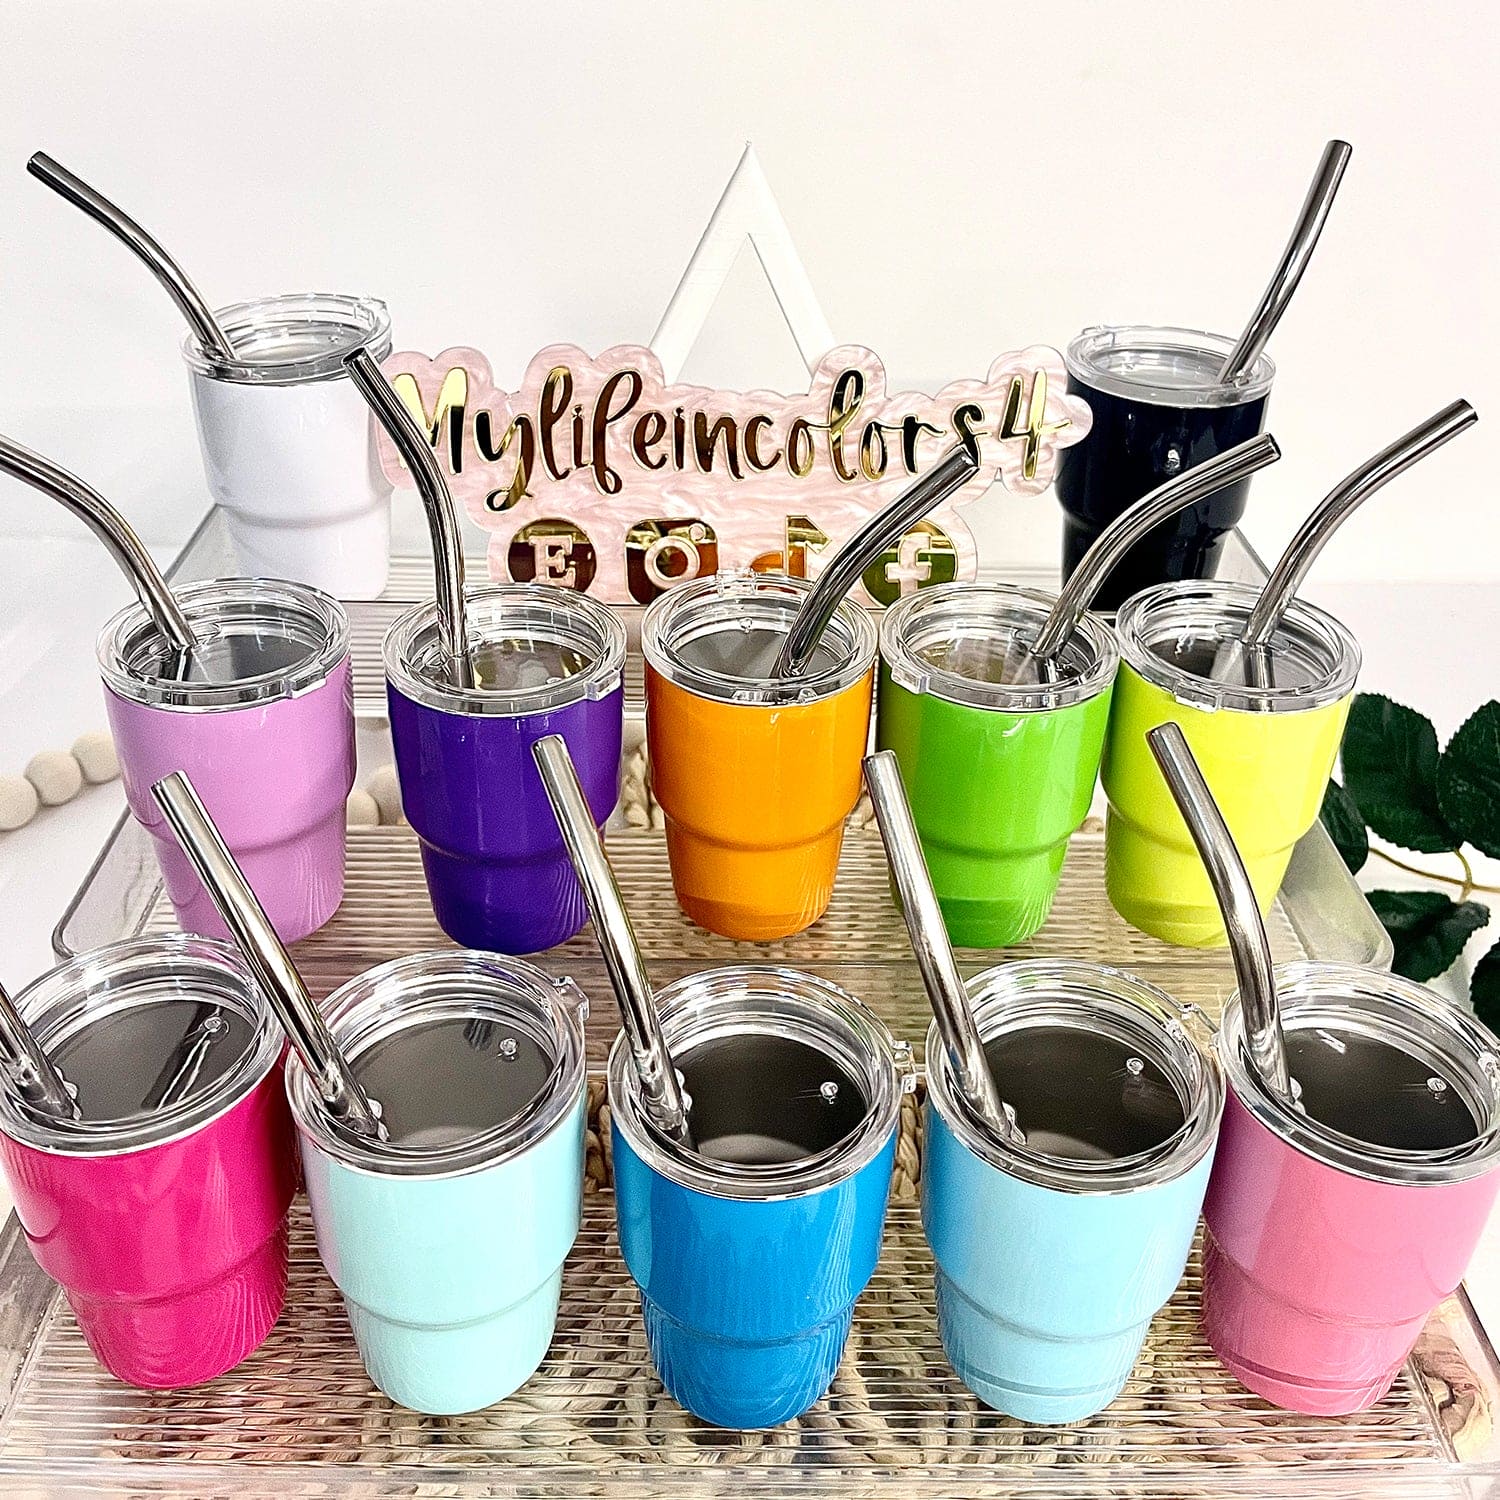 Buy Affordable Sublimation Shot Glasses In Bulk At The Tumbler Company